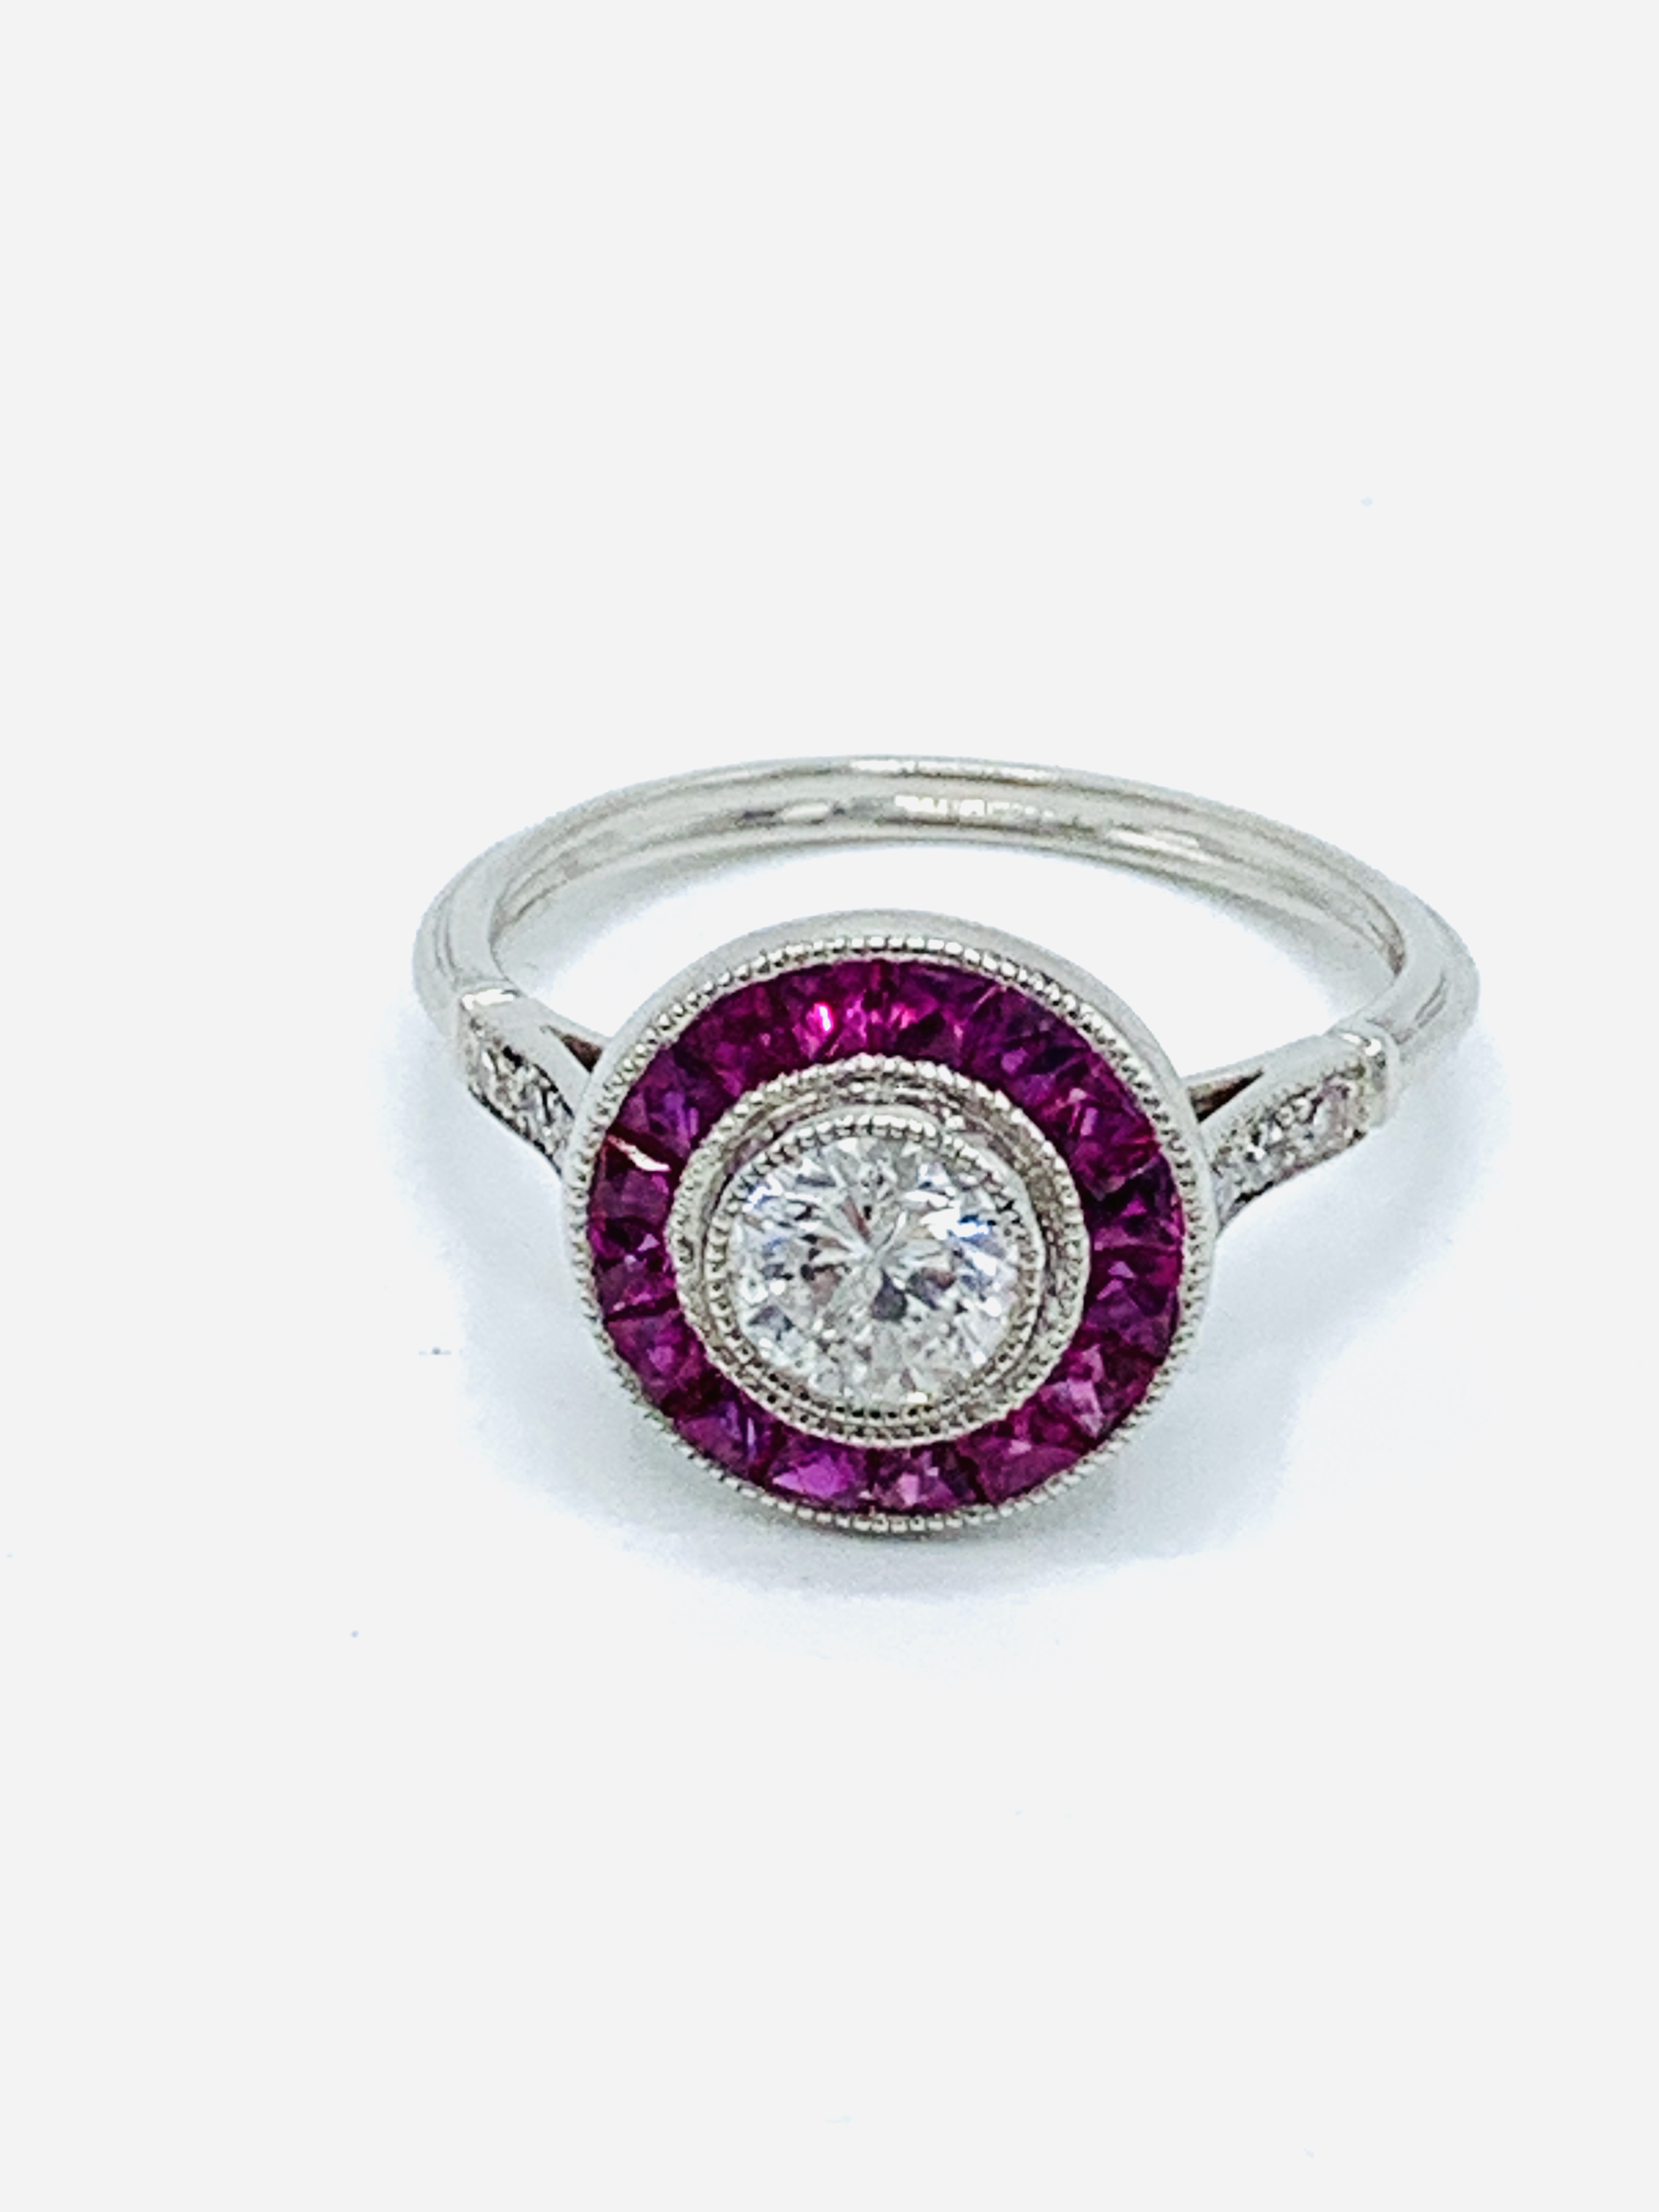 White gold and ruby target ring.